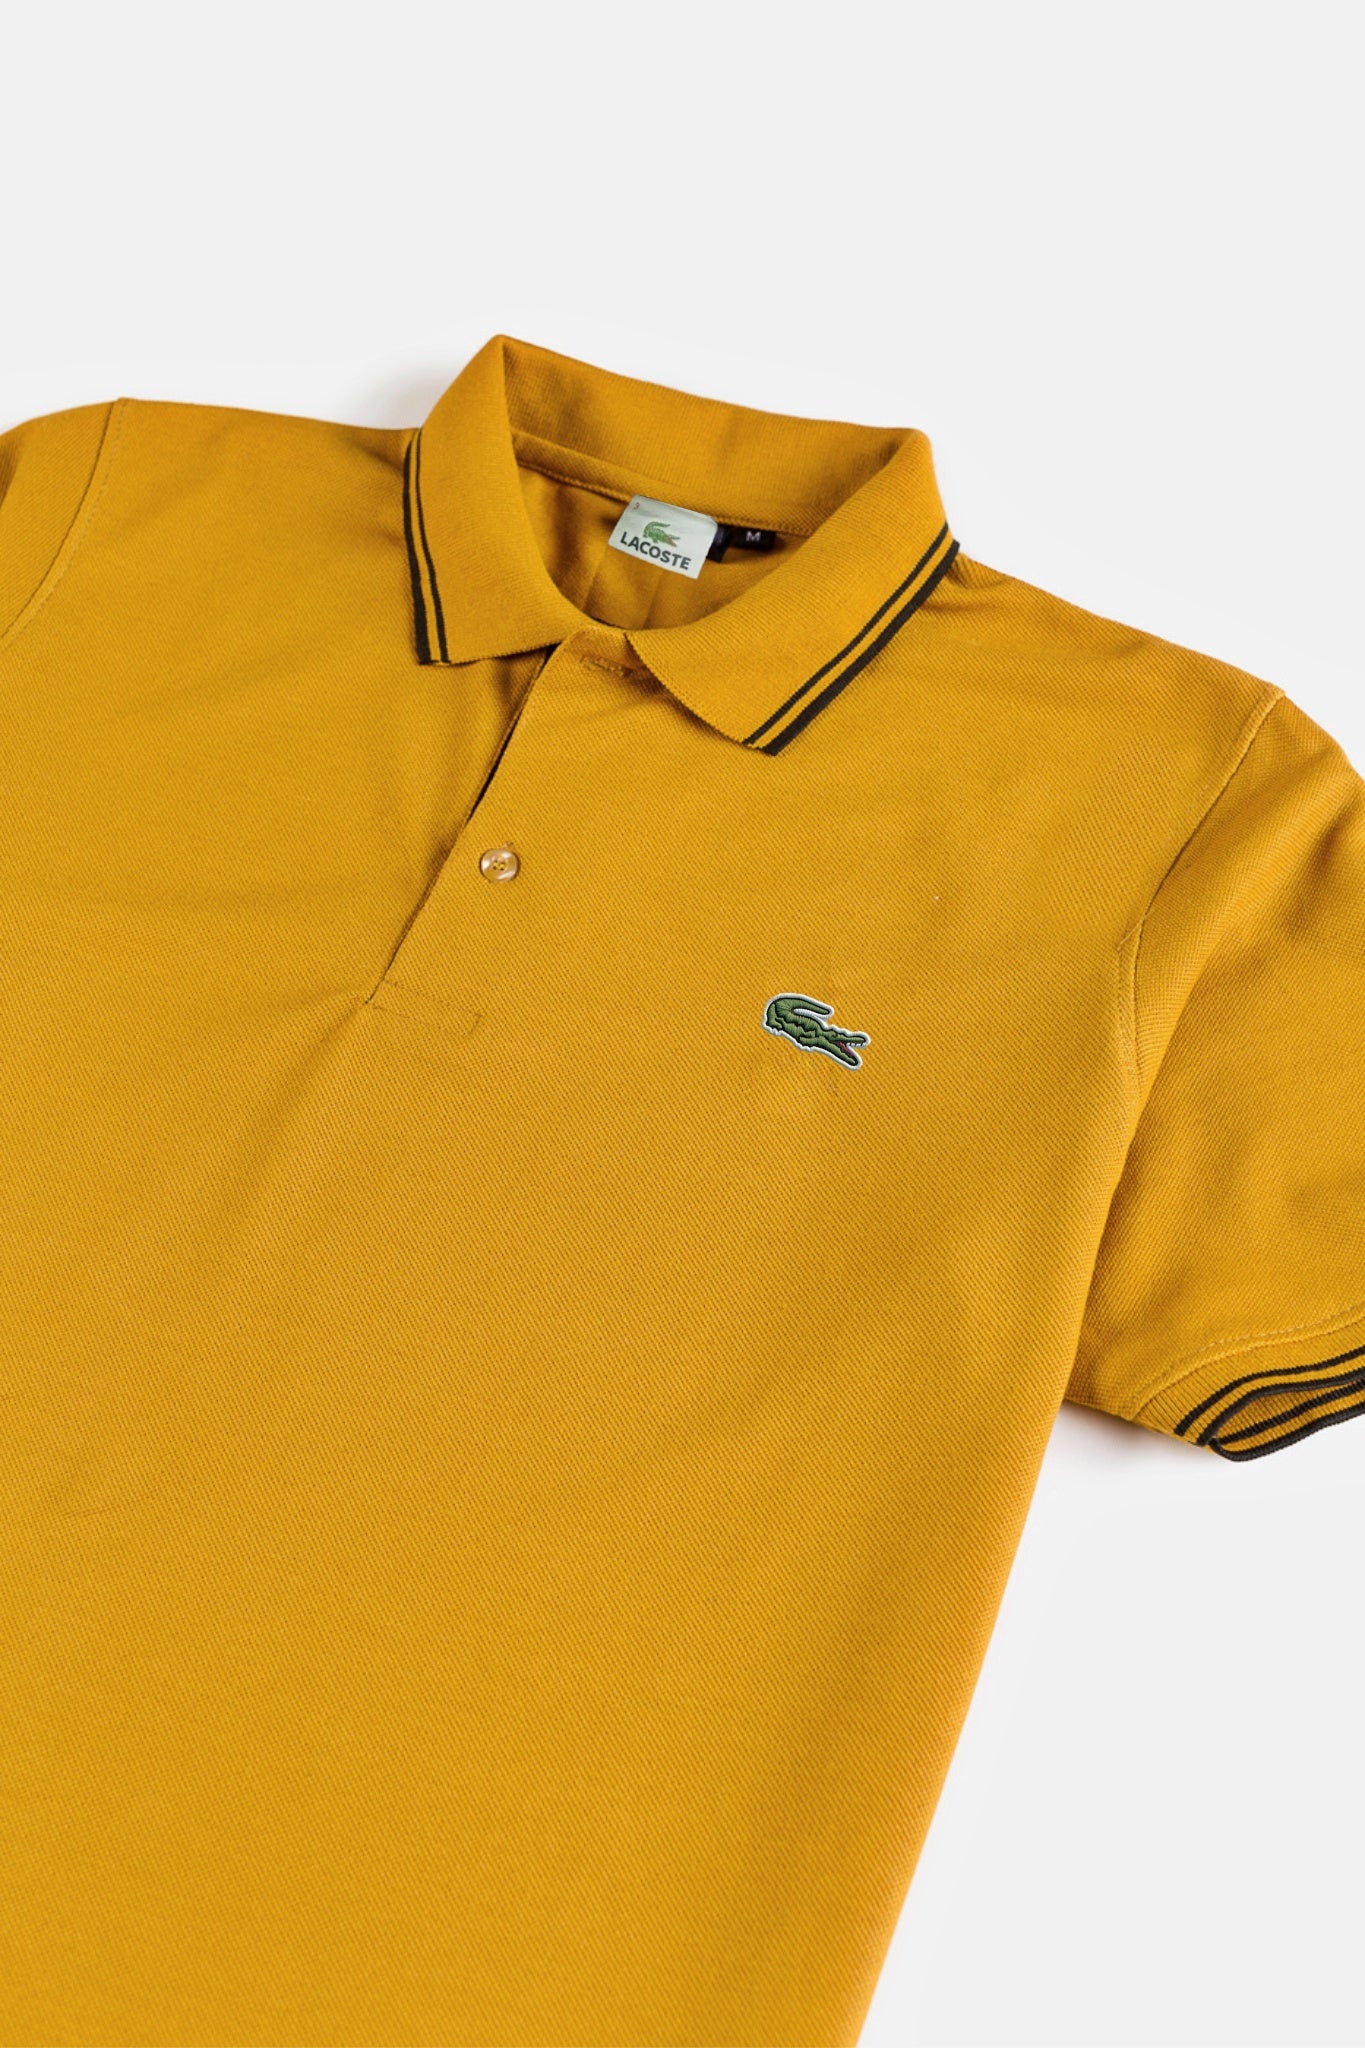 Lacoste Premium Imported Polo Shirt – Mustard